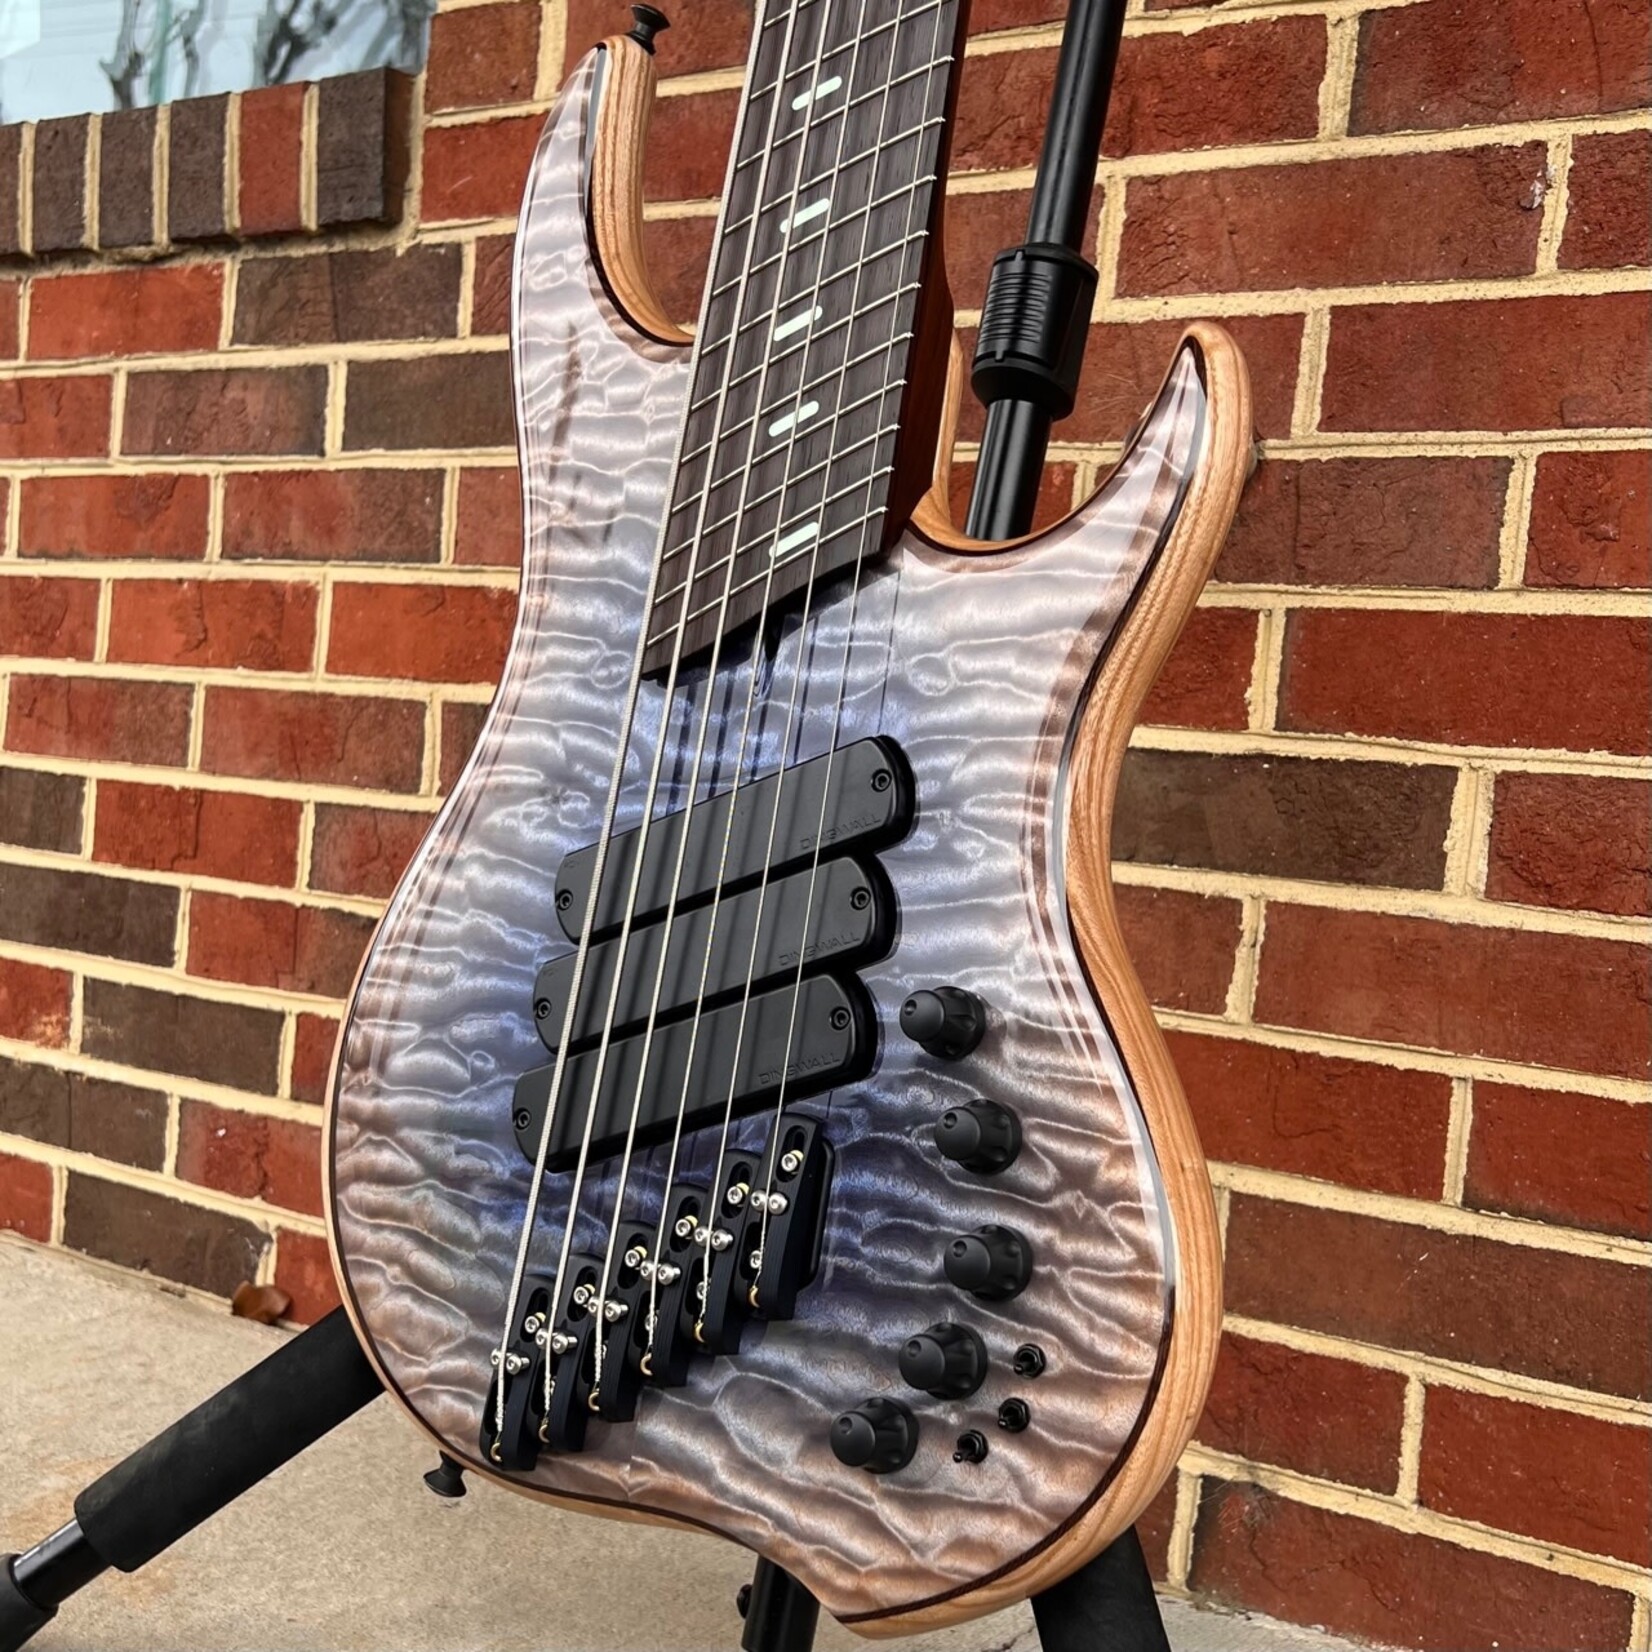 Dingwall Dingwall Z3 Custom 6-String, Blue to Ashes Reverse Burst, Quilted Maple Top, Wenge Contrast Layer, Dual Density Swamp Ash Body, Roasted Ash Neck, Wenge Fretboard, Luminlay Speedo Bars, Glockenklang Preamp w/ Toggles, Dingwall Deluxe Gig Bag, SN# 6712